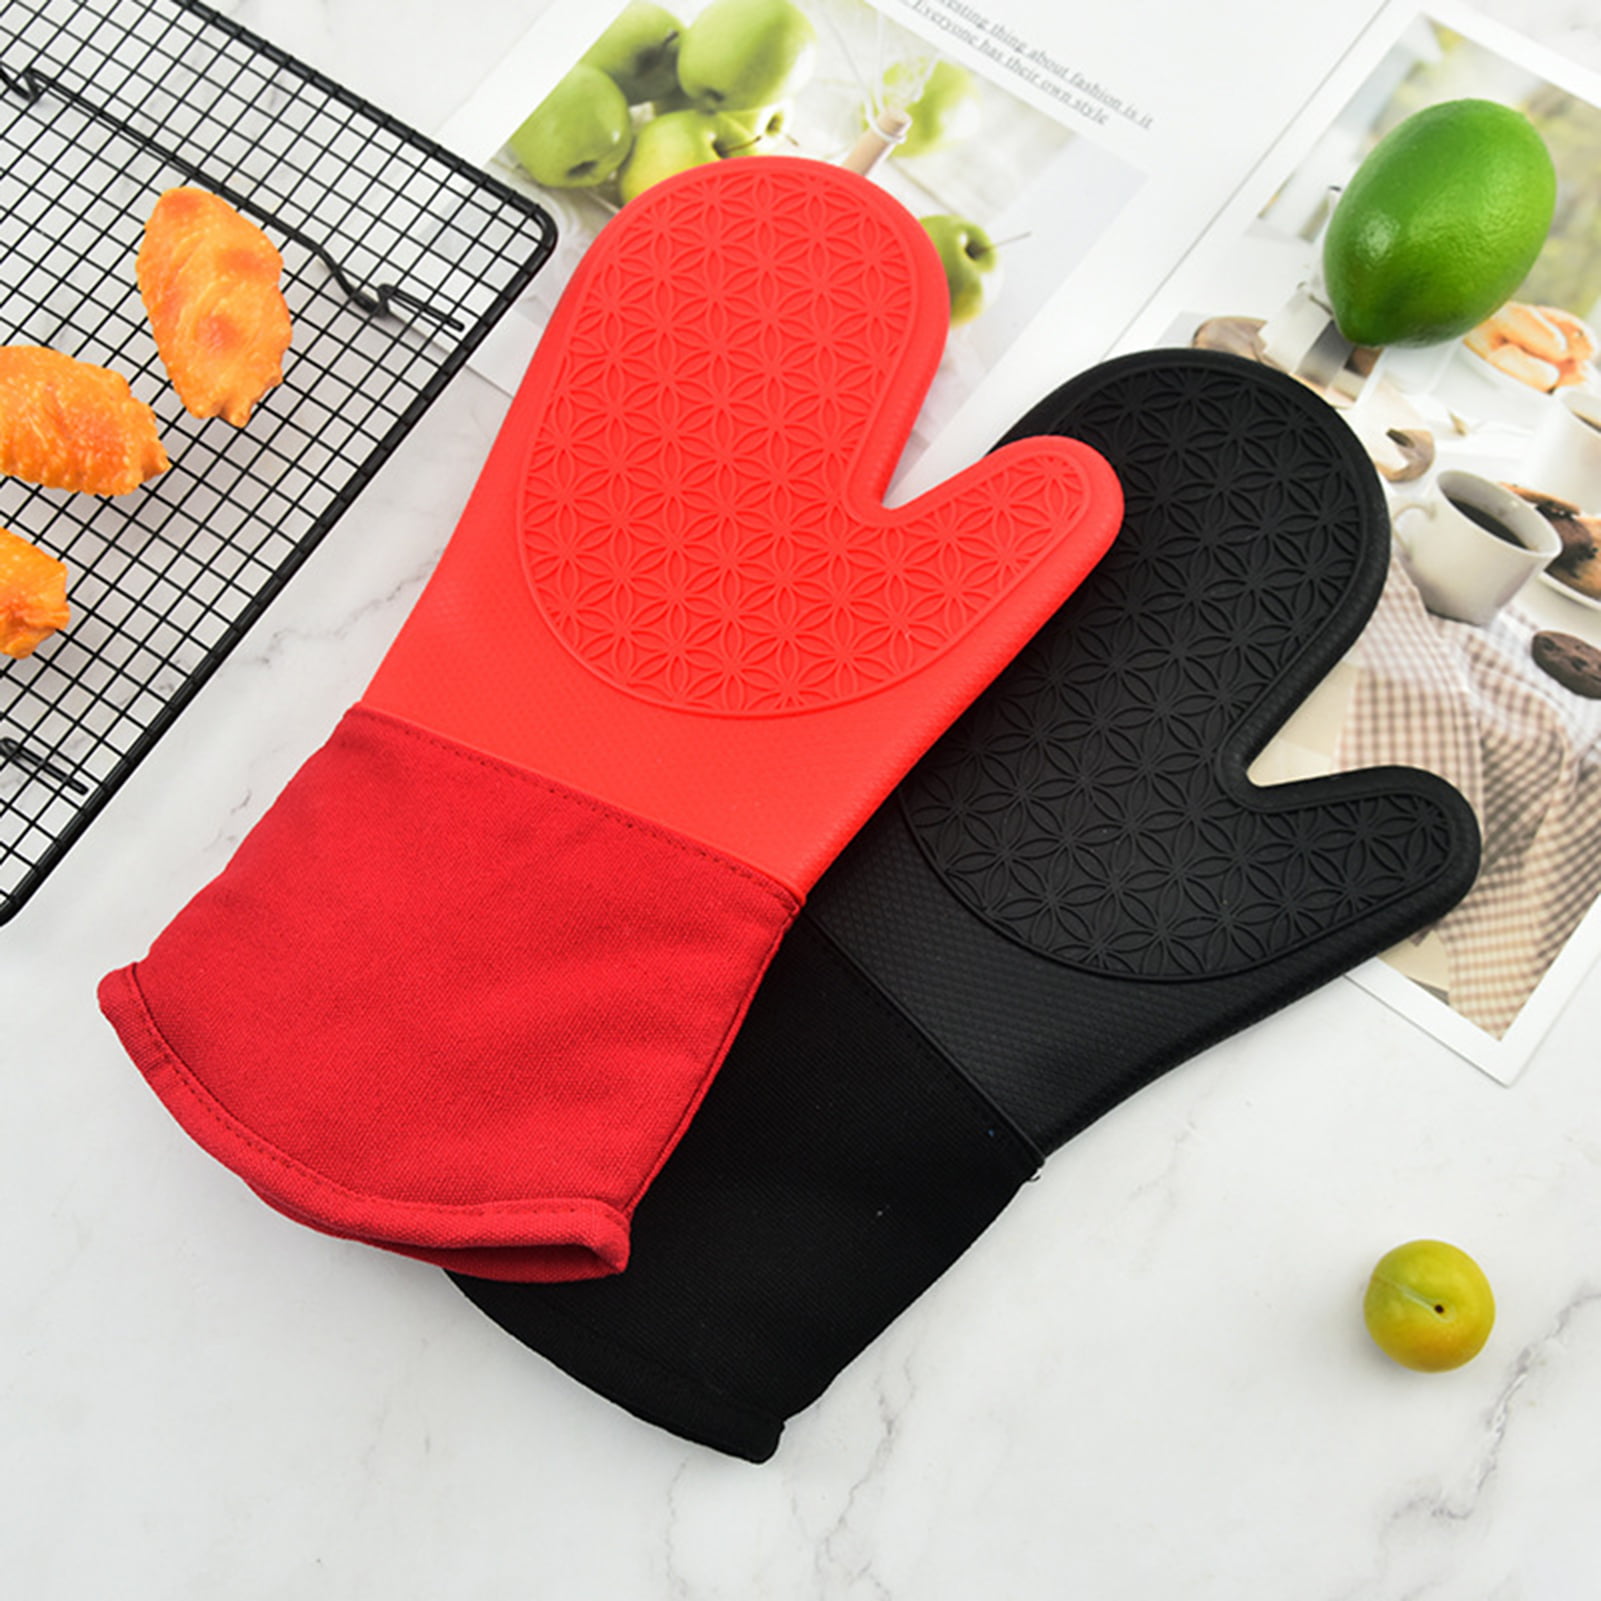 GROFRY 1Pc Oven Glove High Toughness Wear Resistant Silicone Non